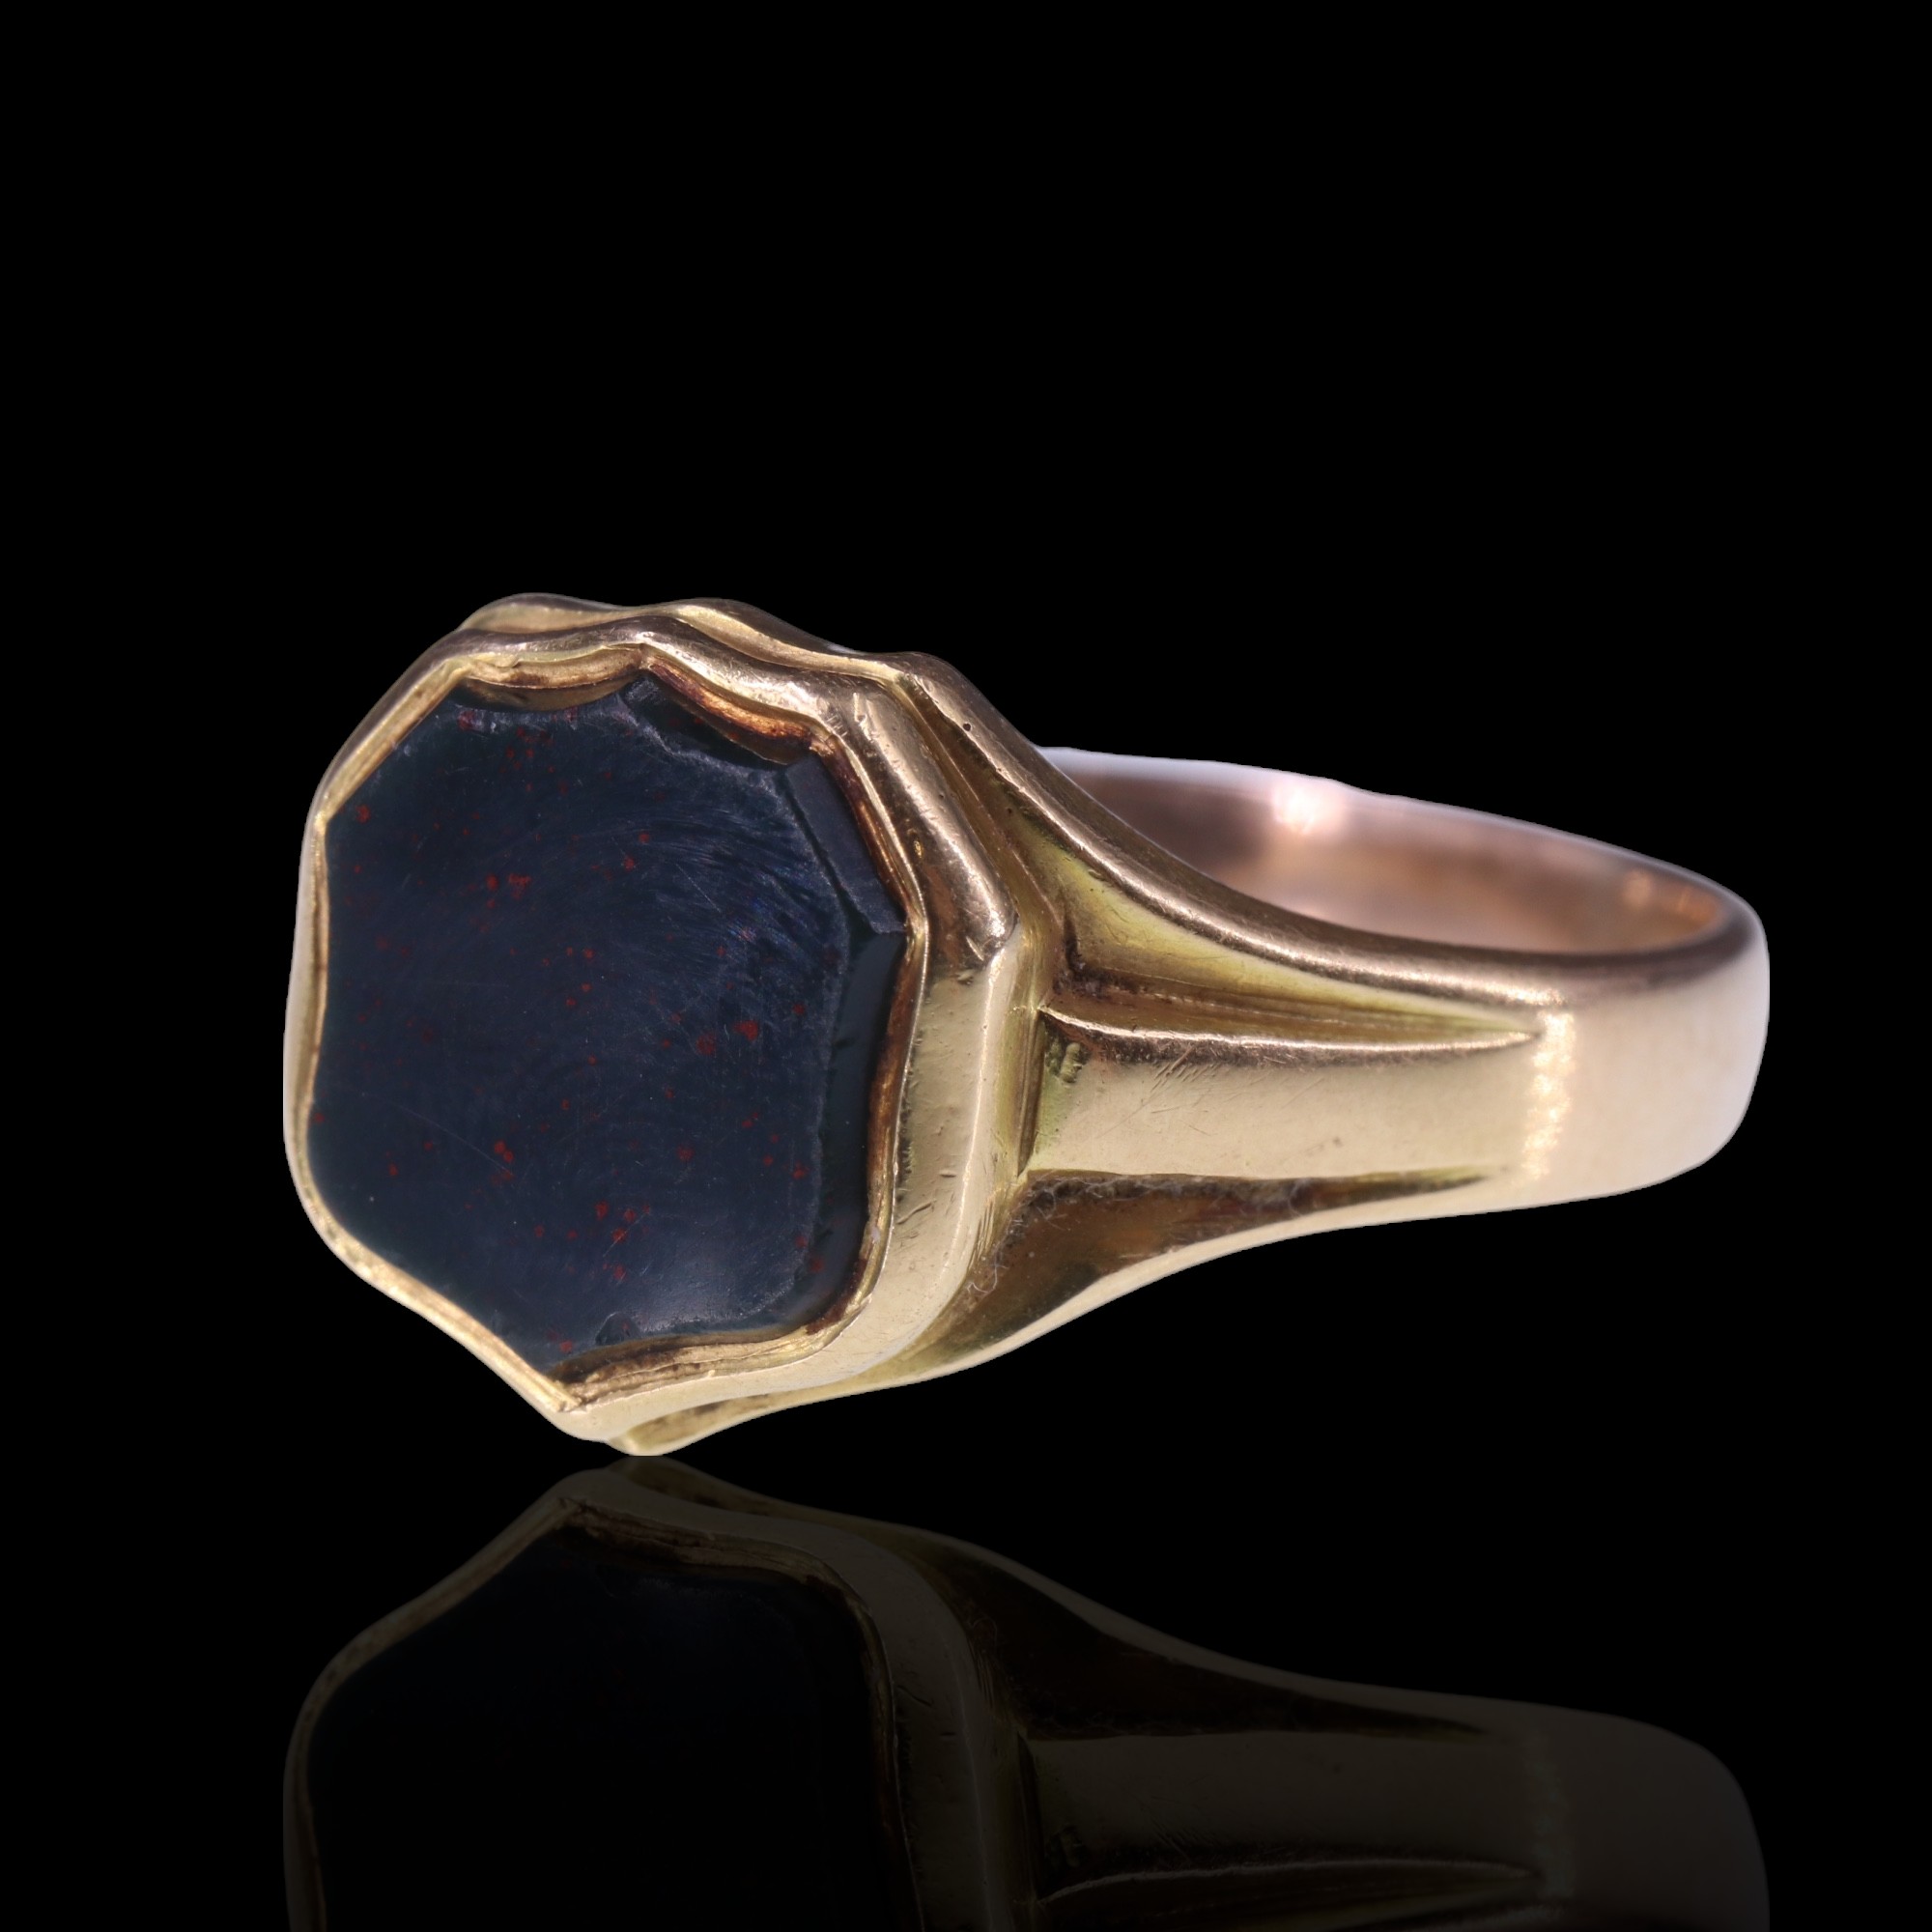 A Victorian 18 ct gold signet ring, having a vacant shield-shaped matrix bezel-set on a heavy gold